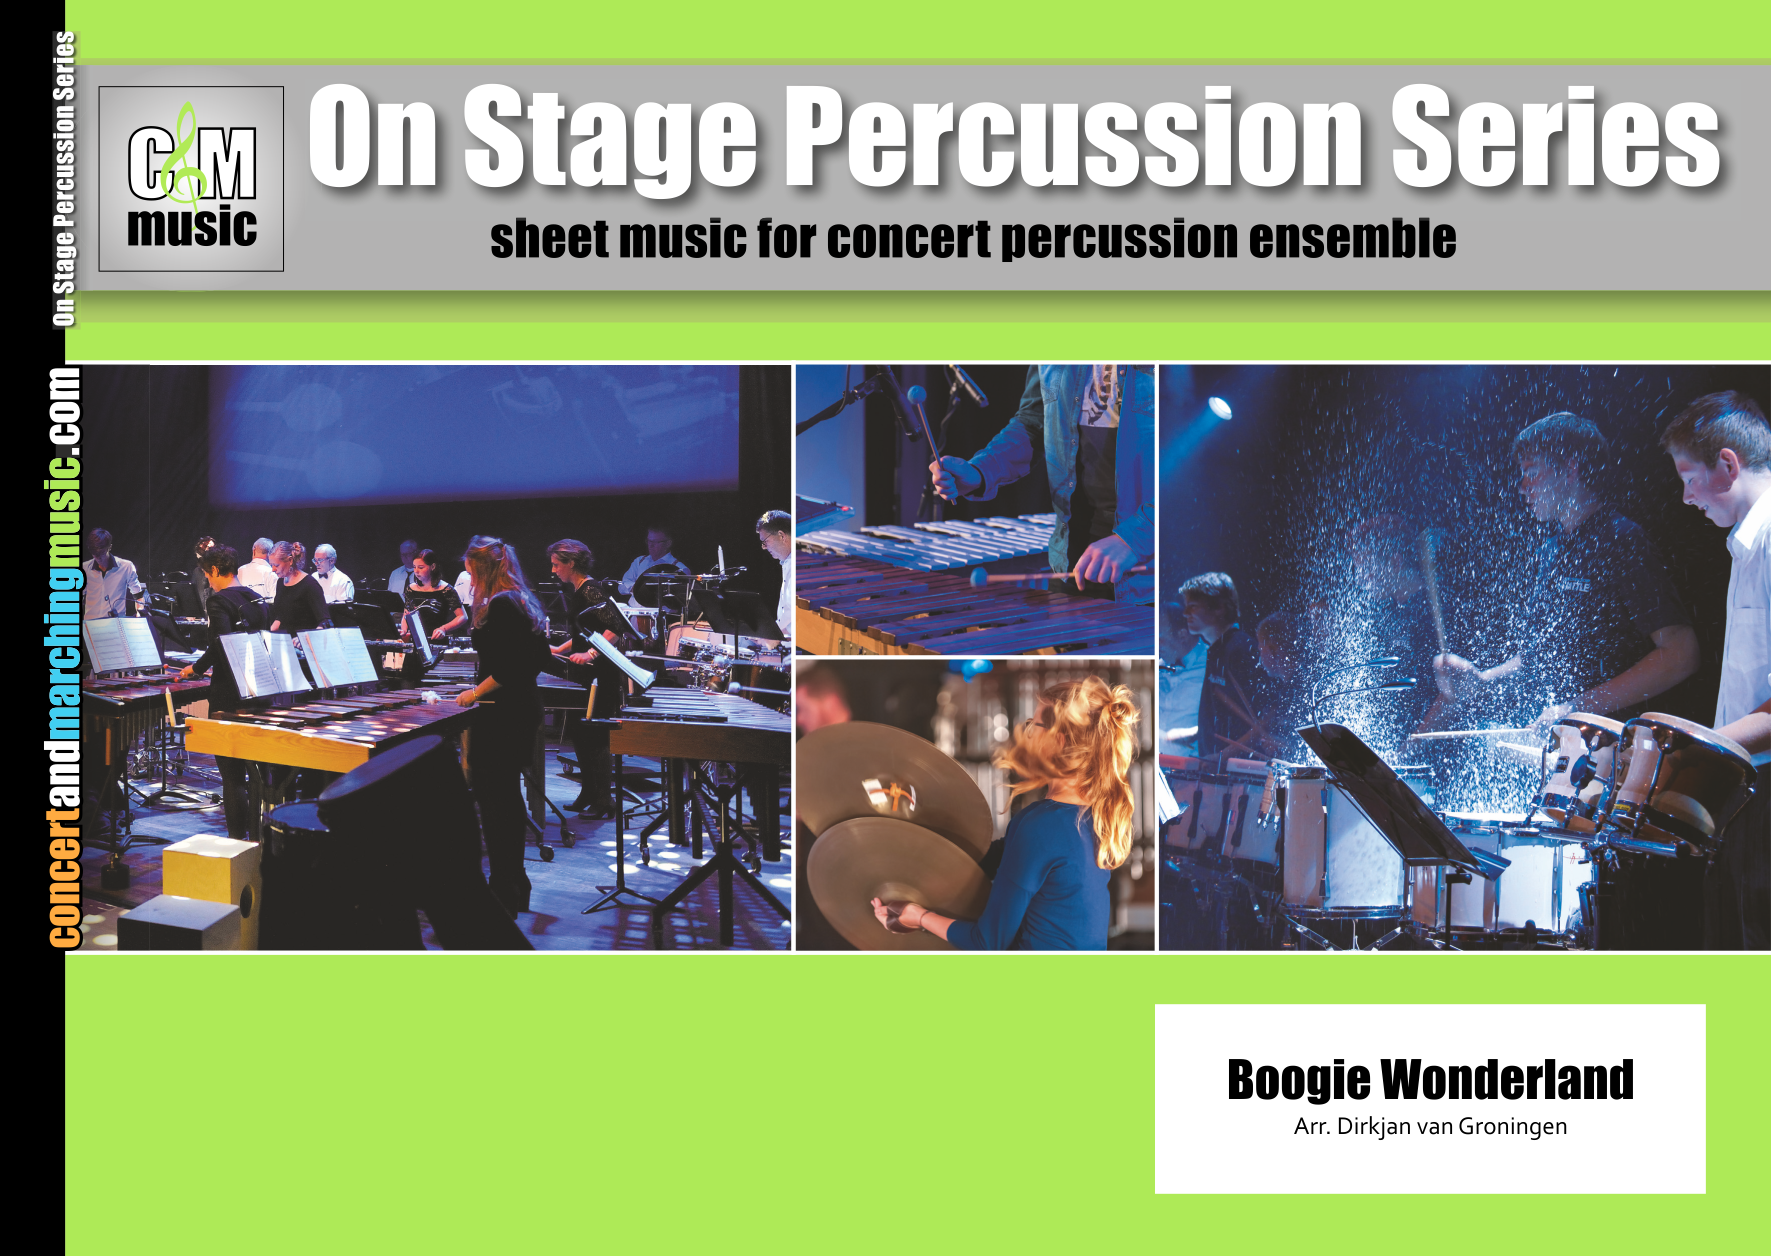 Sheet music from Boogie Wonderland for Percussion Ensemble.